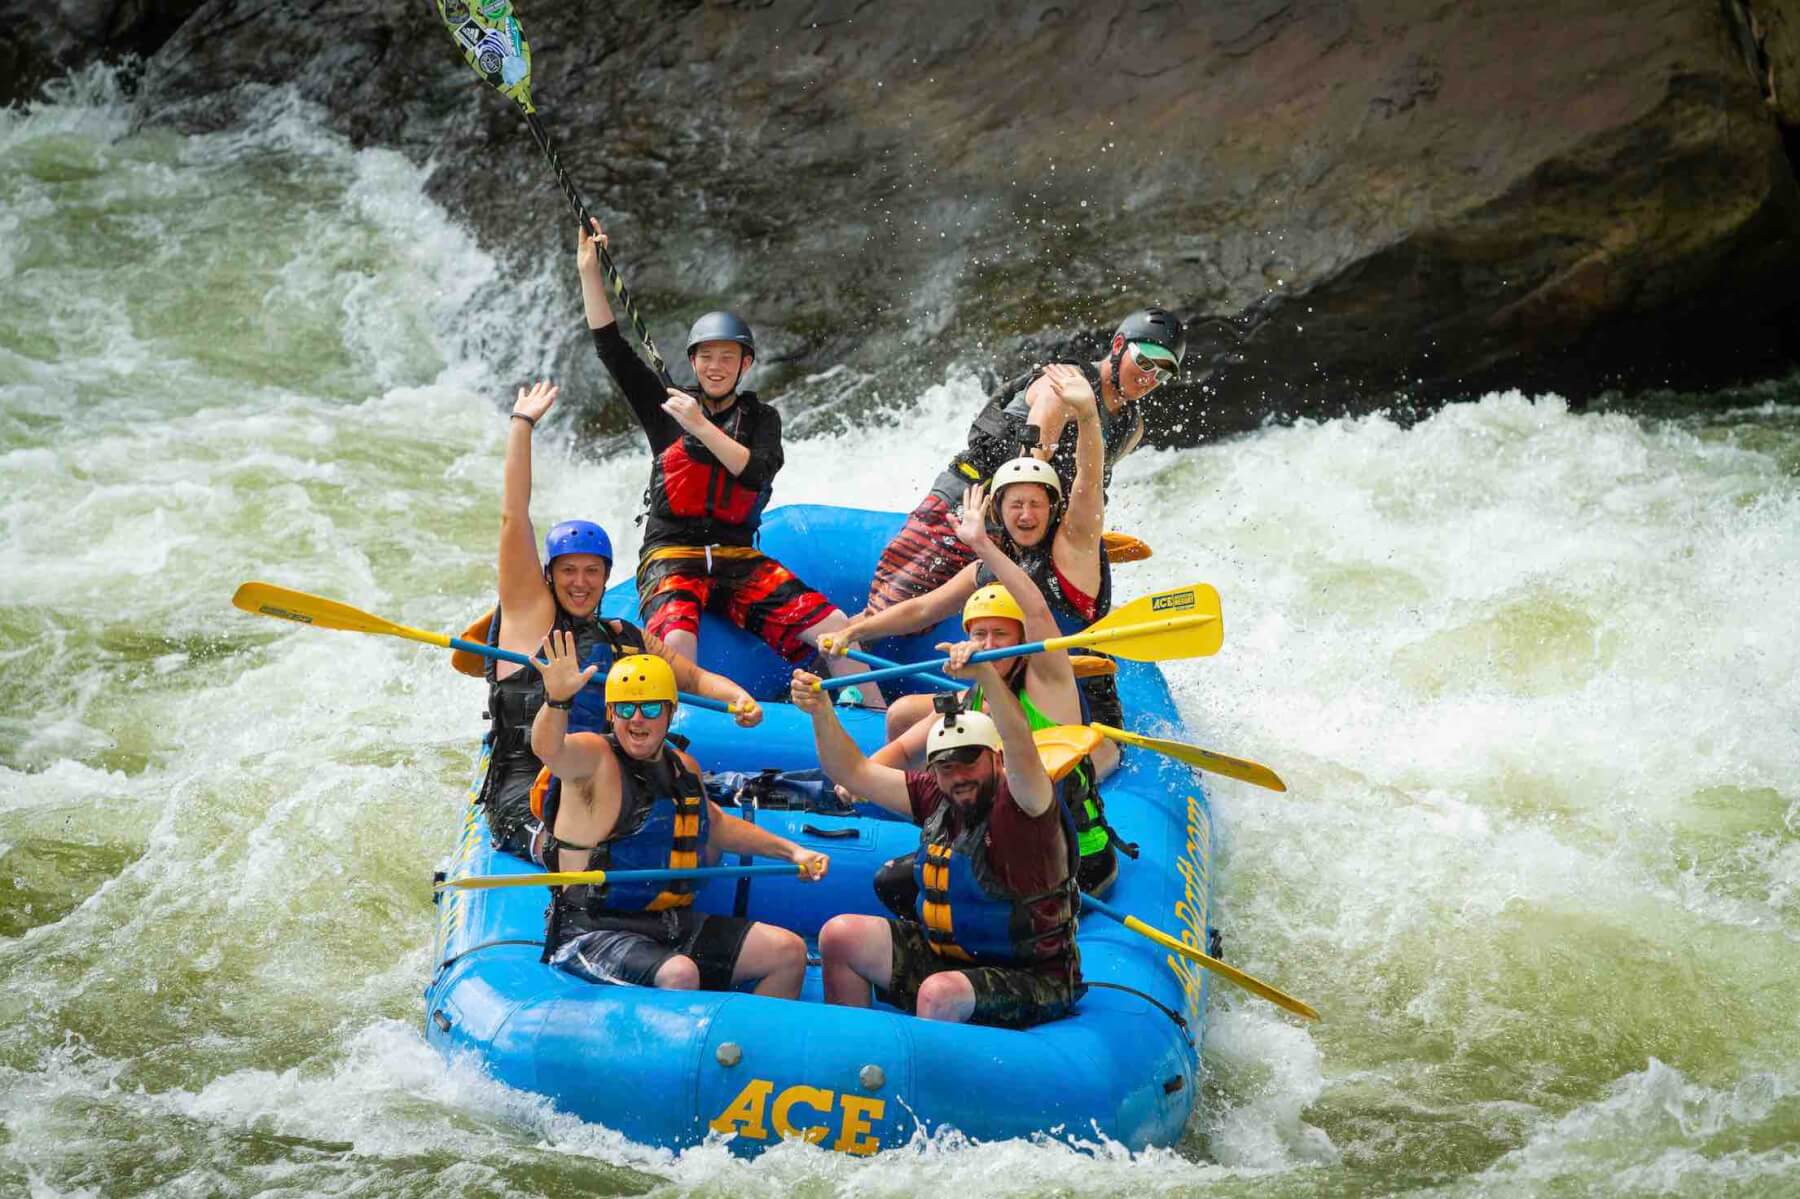 whitewater rafting on the new river gorge with ace adventure resort